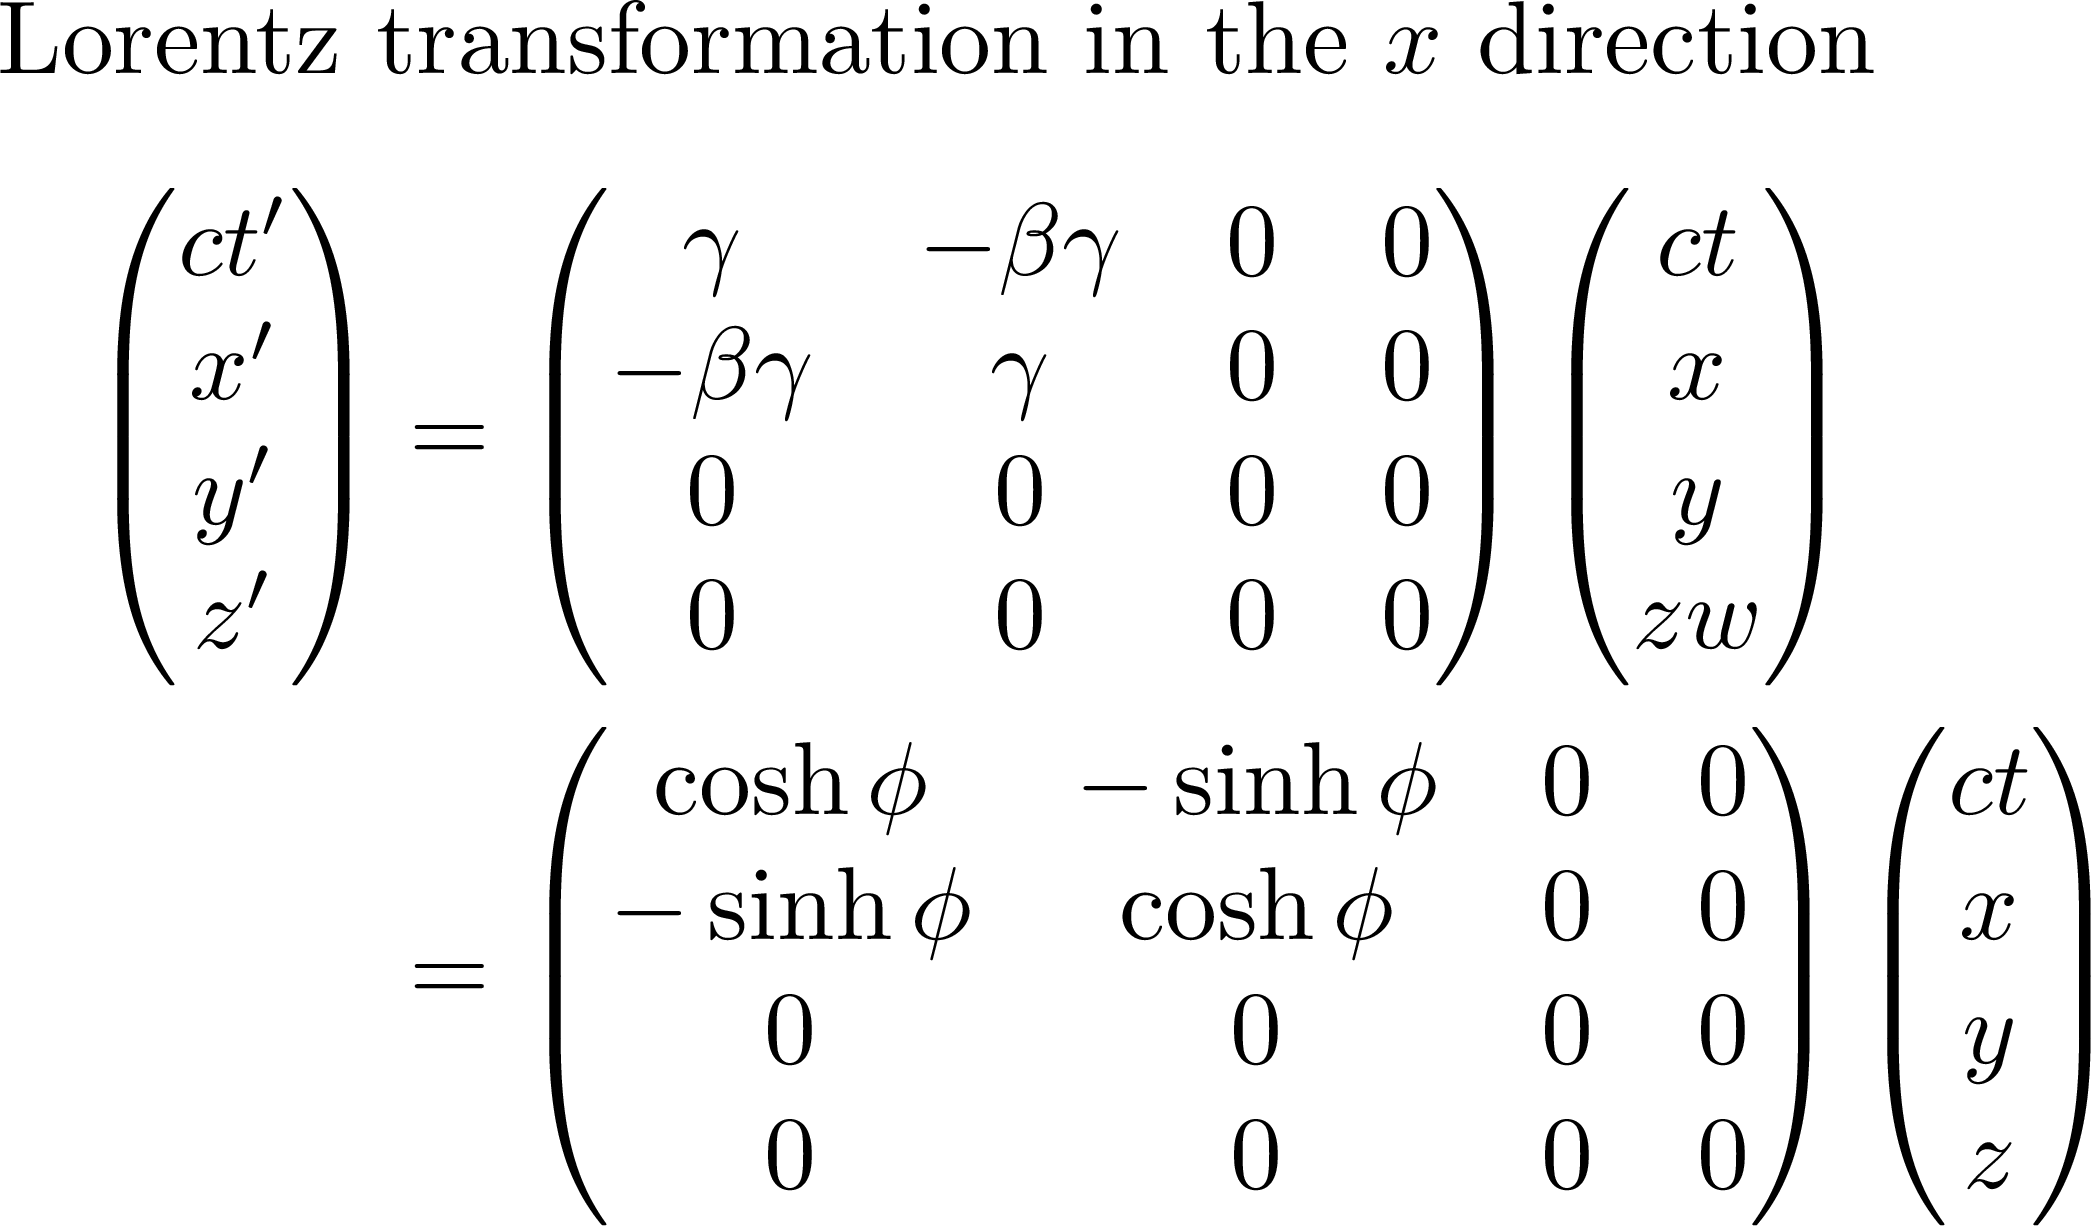 Lorentz transformation matrix with hyperbolic functions sinh and cosh.